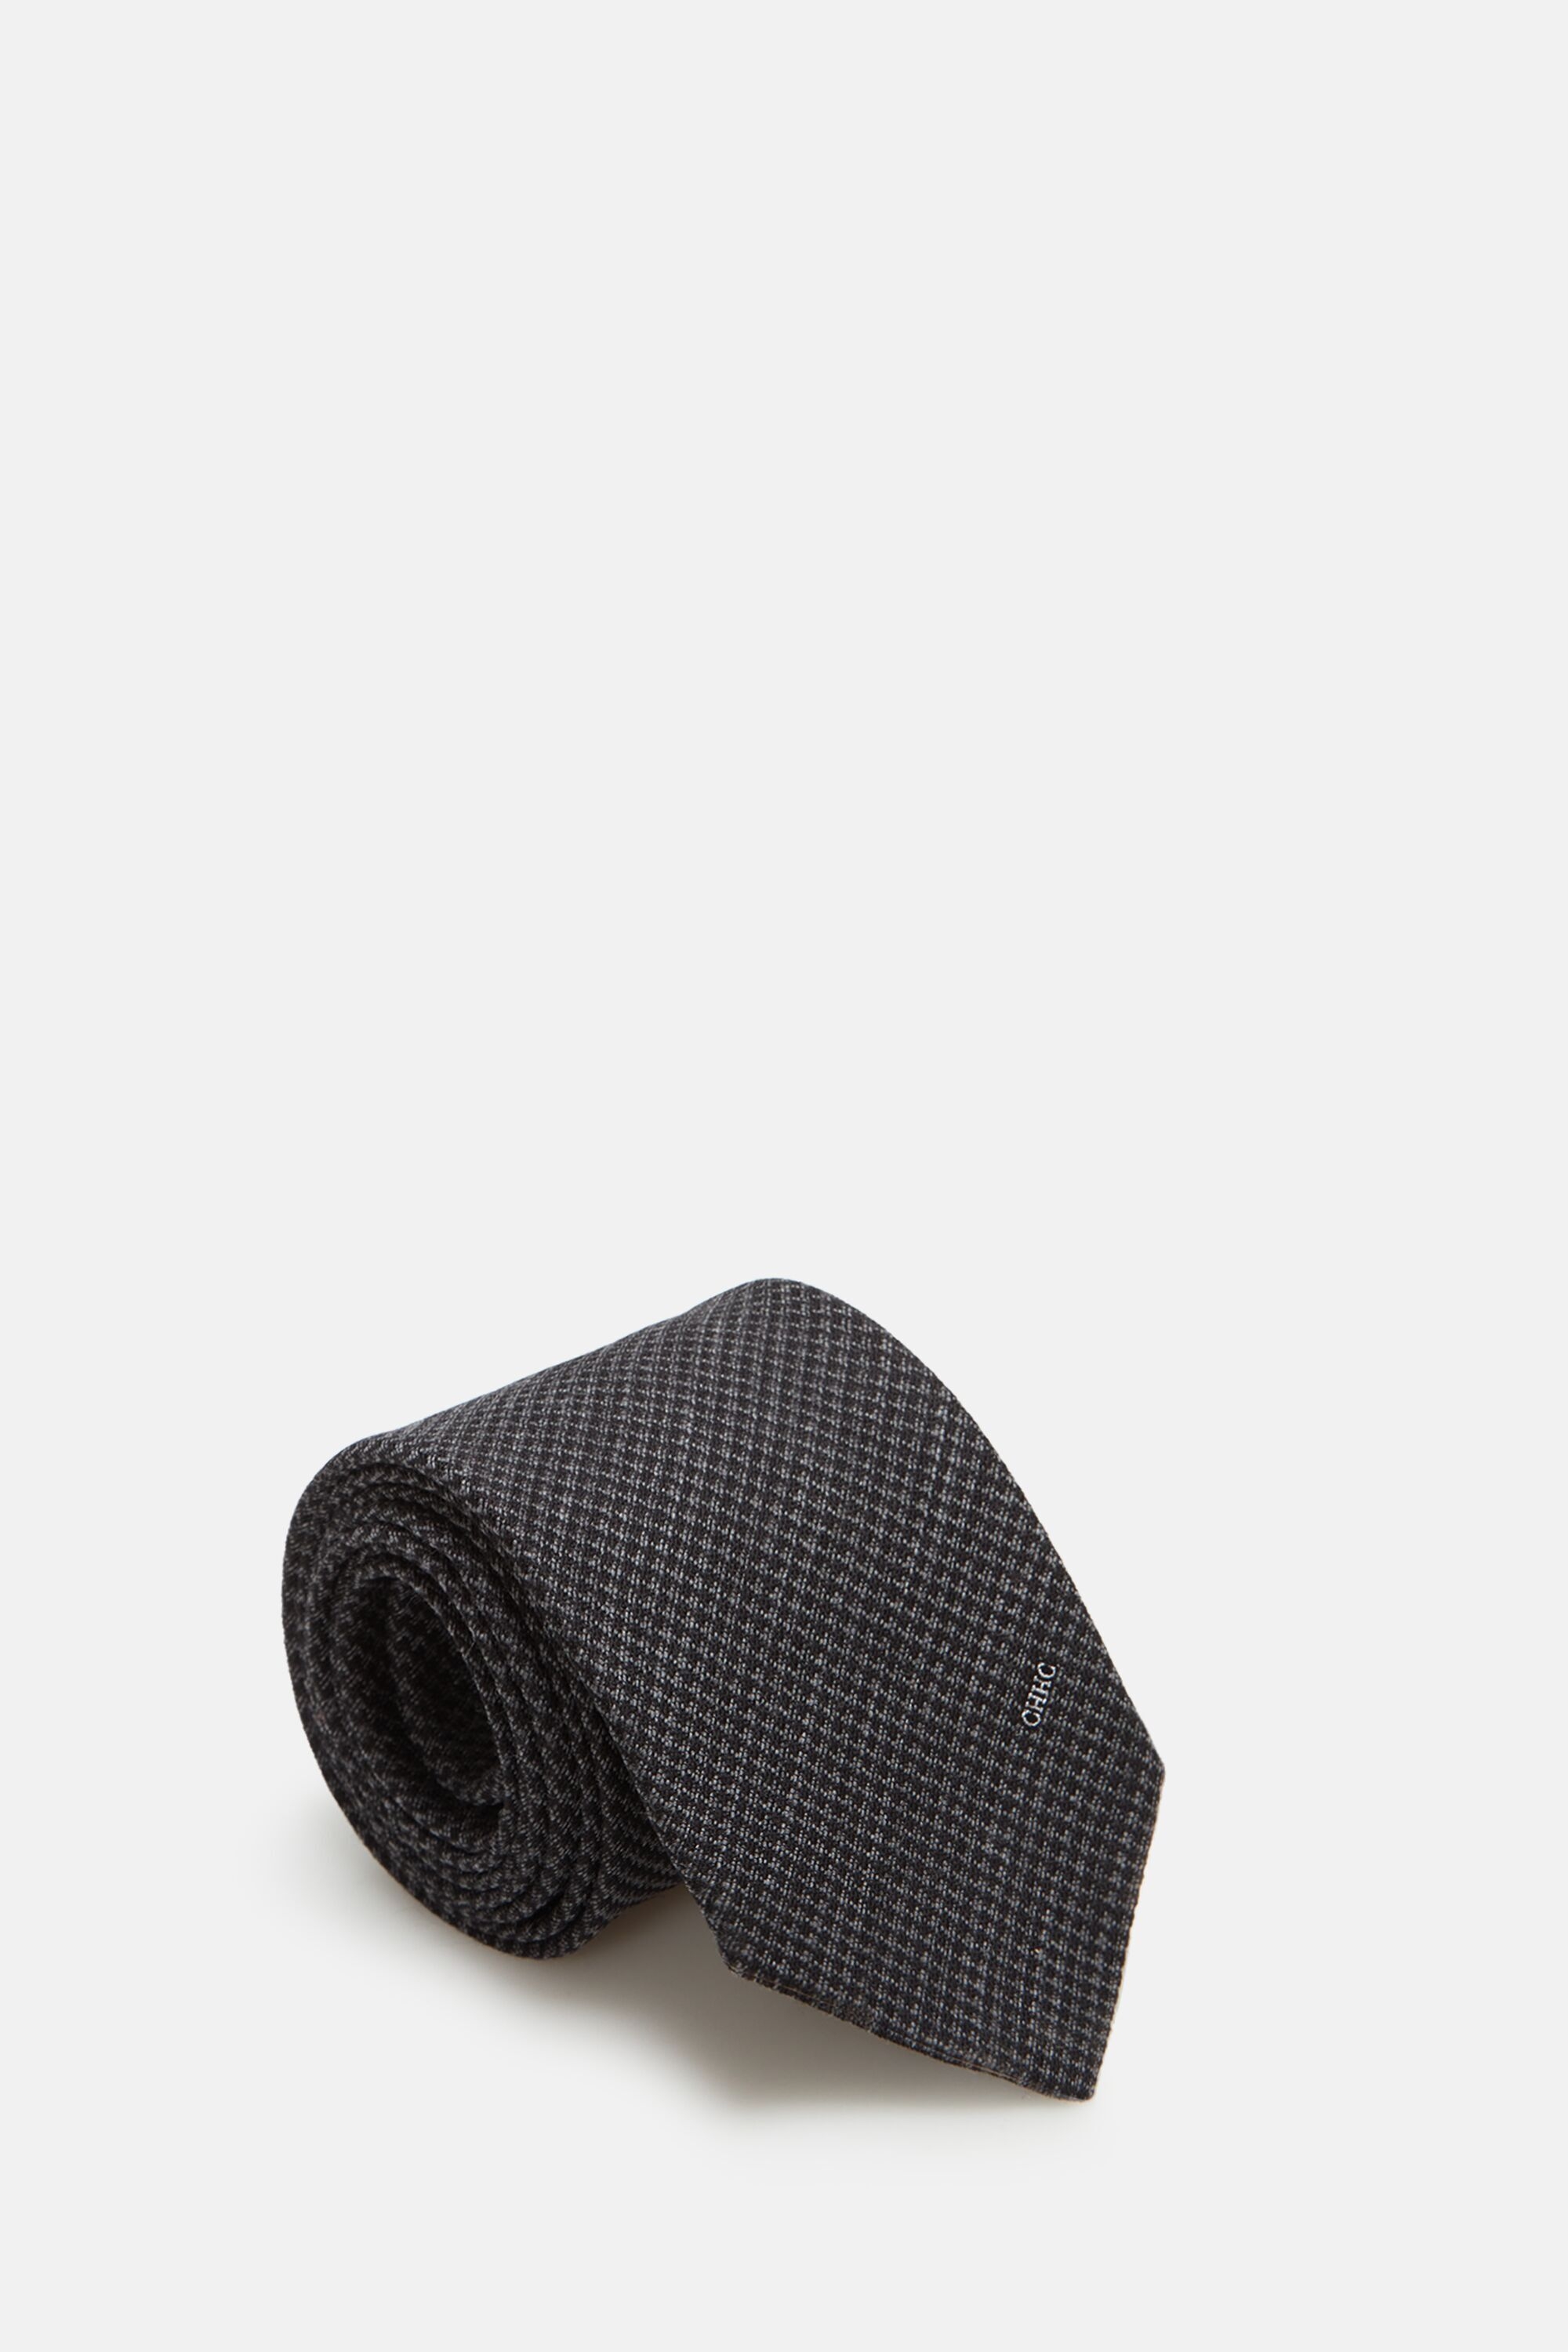 Structured silk and wool tie